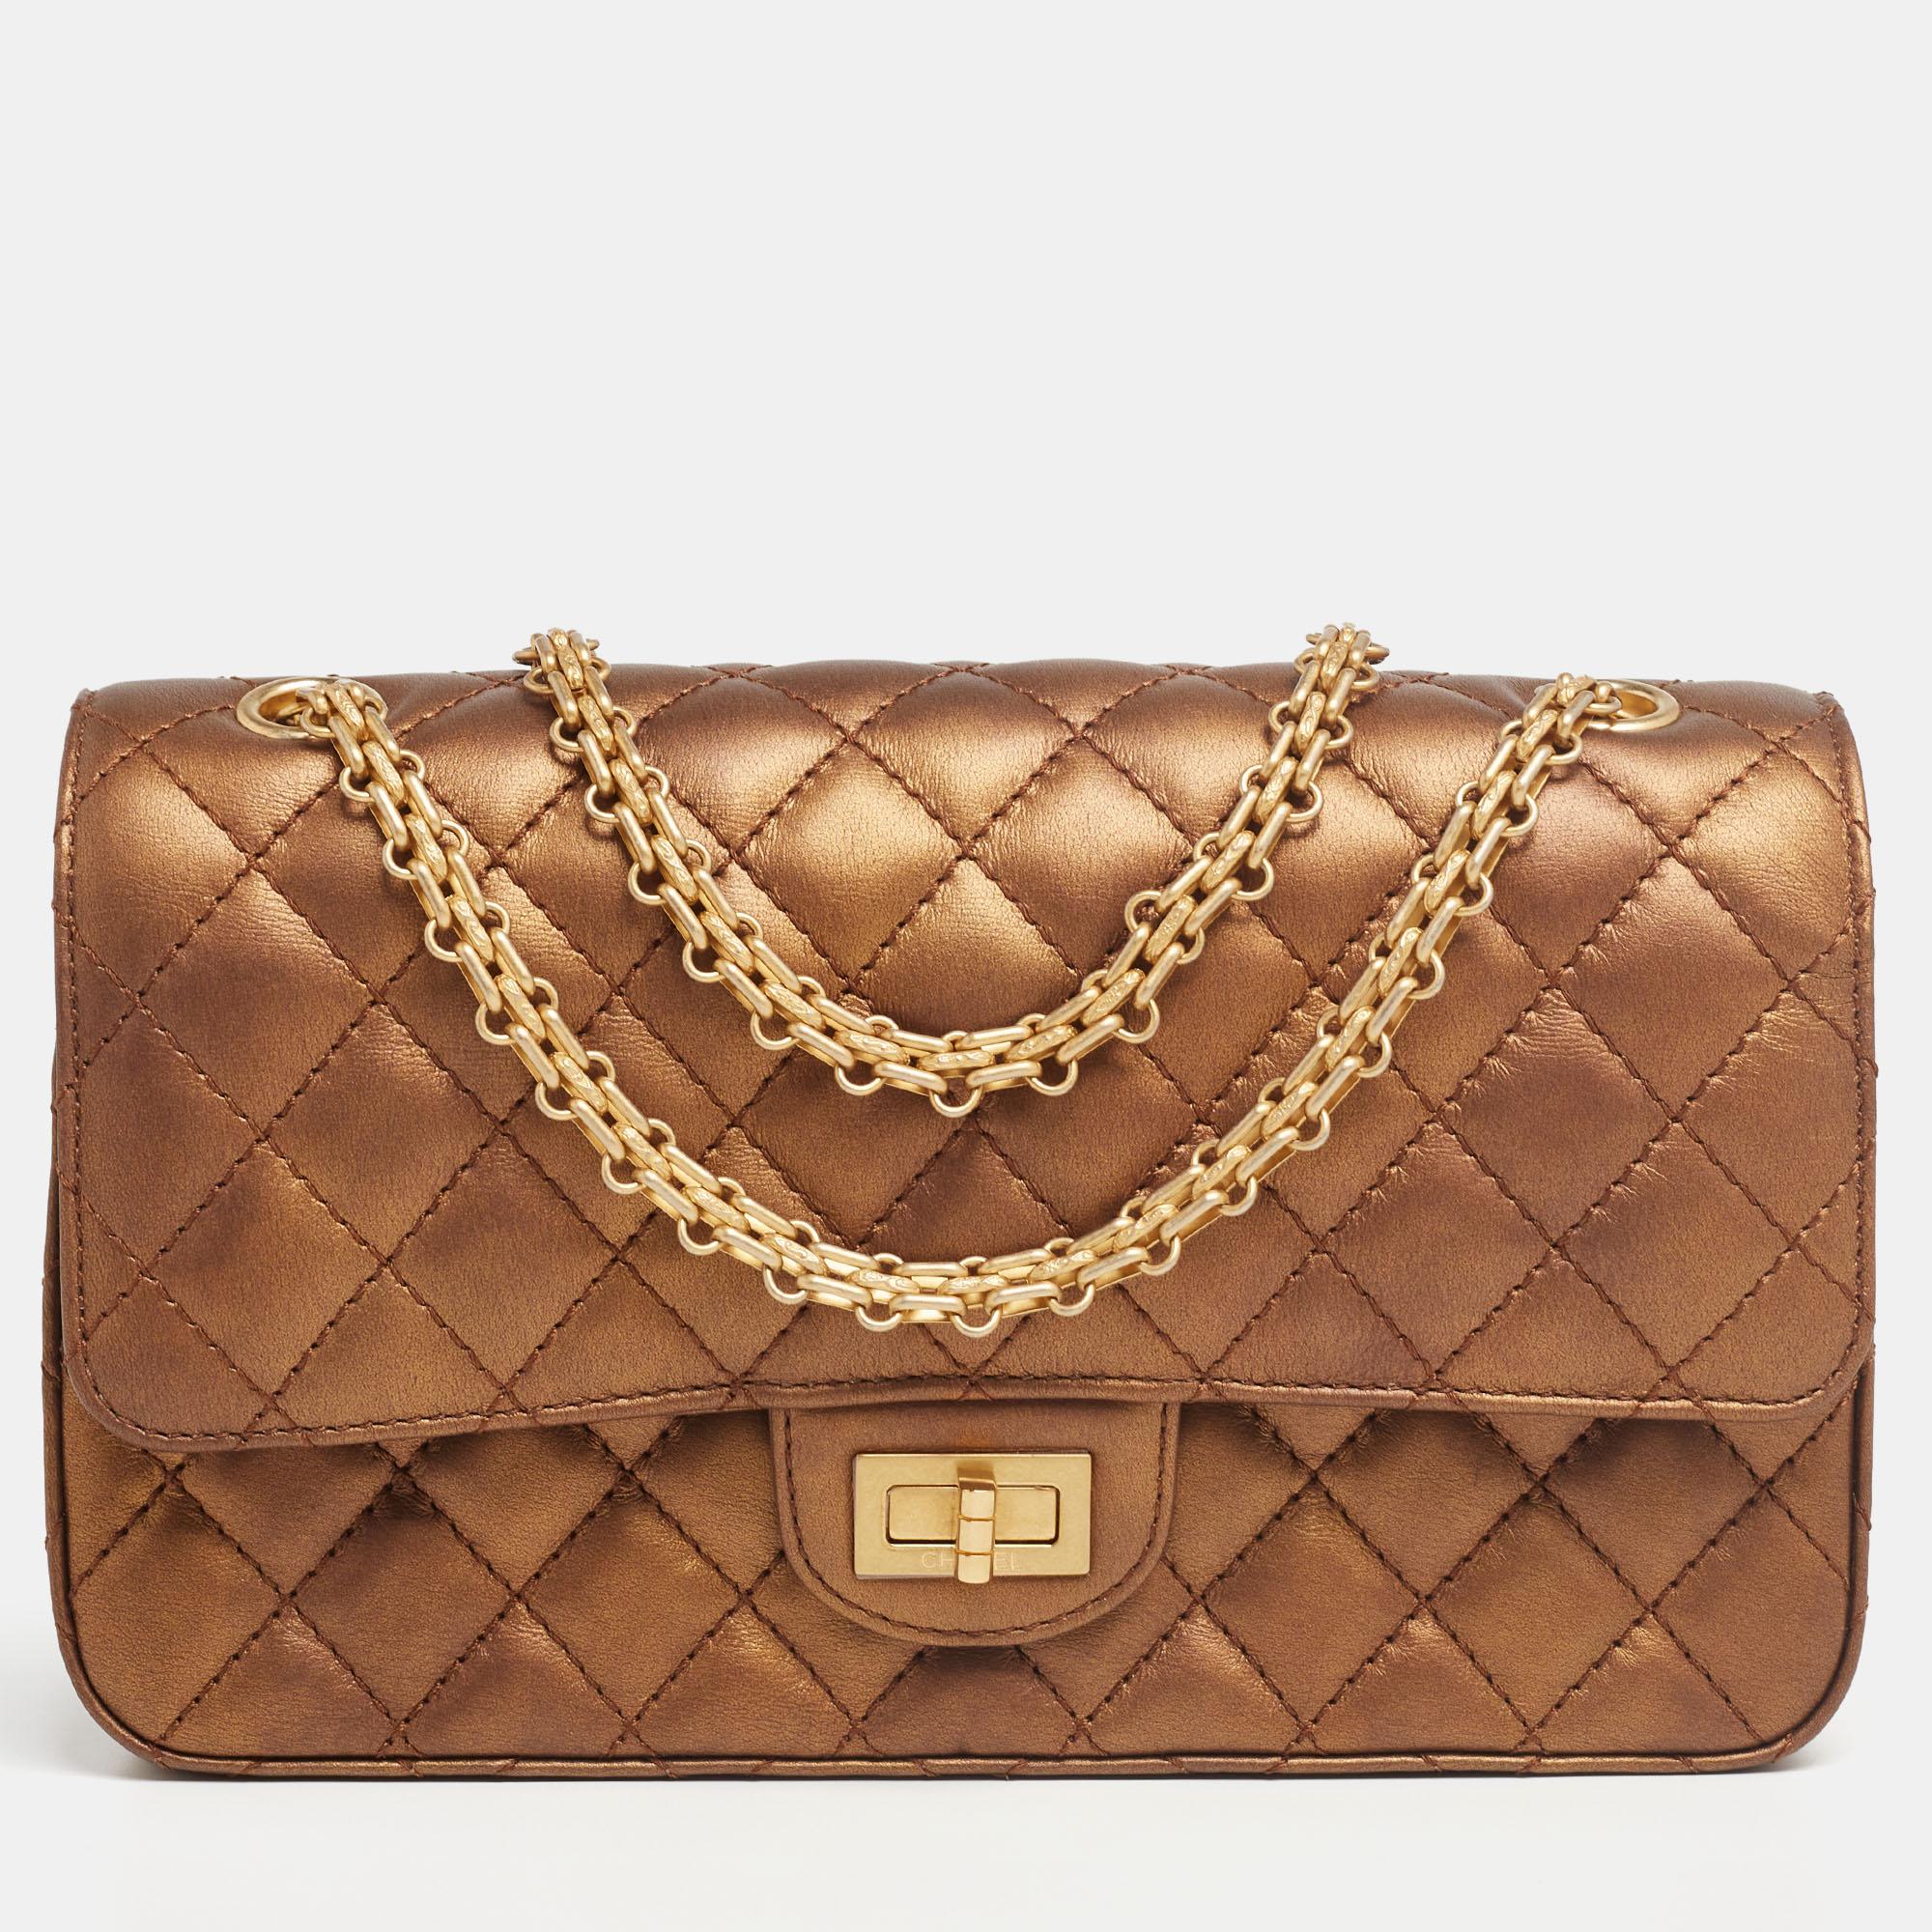 Chanel Metallic Bronze Quilted Leather 2.55 Reissue Classic 225 Flap Bag 4